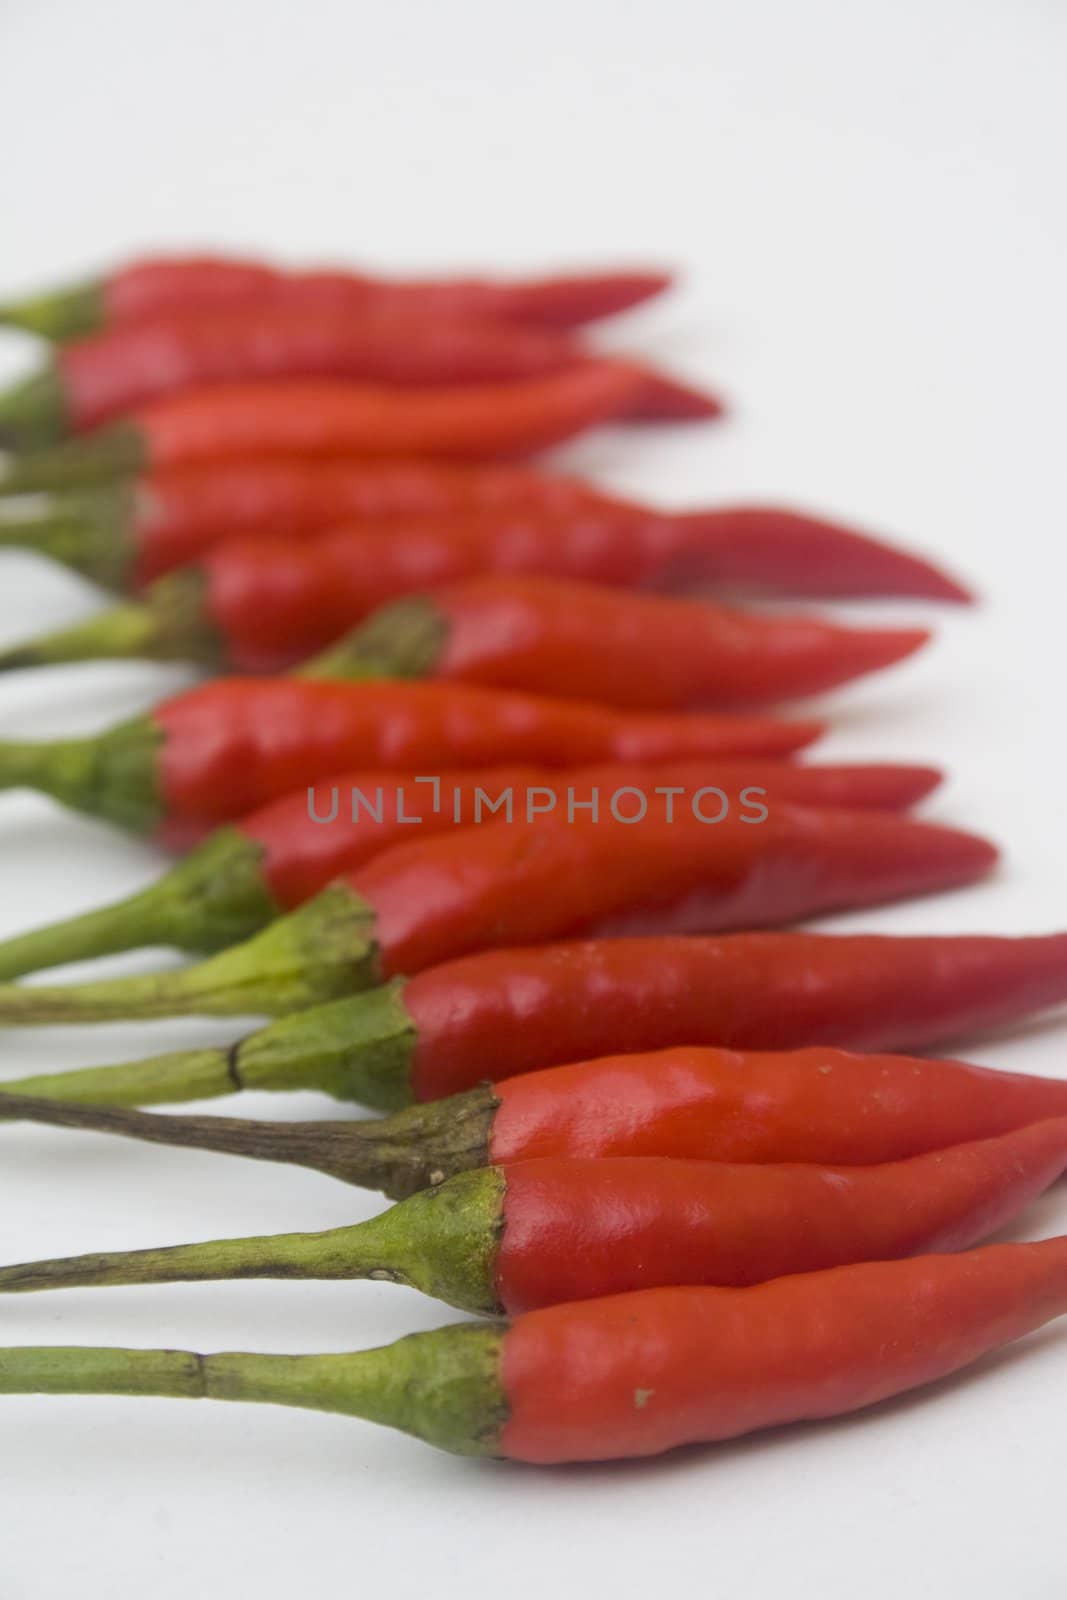 Chili peppers by timscottrom